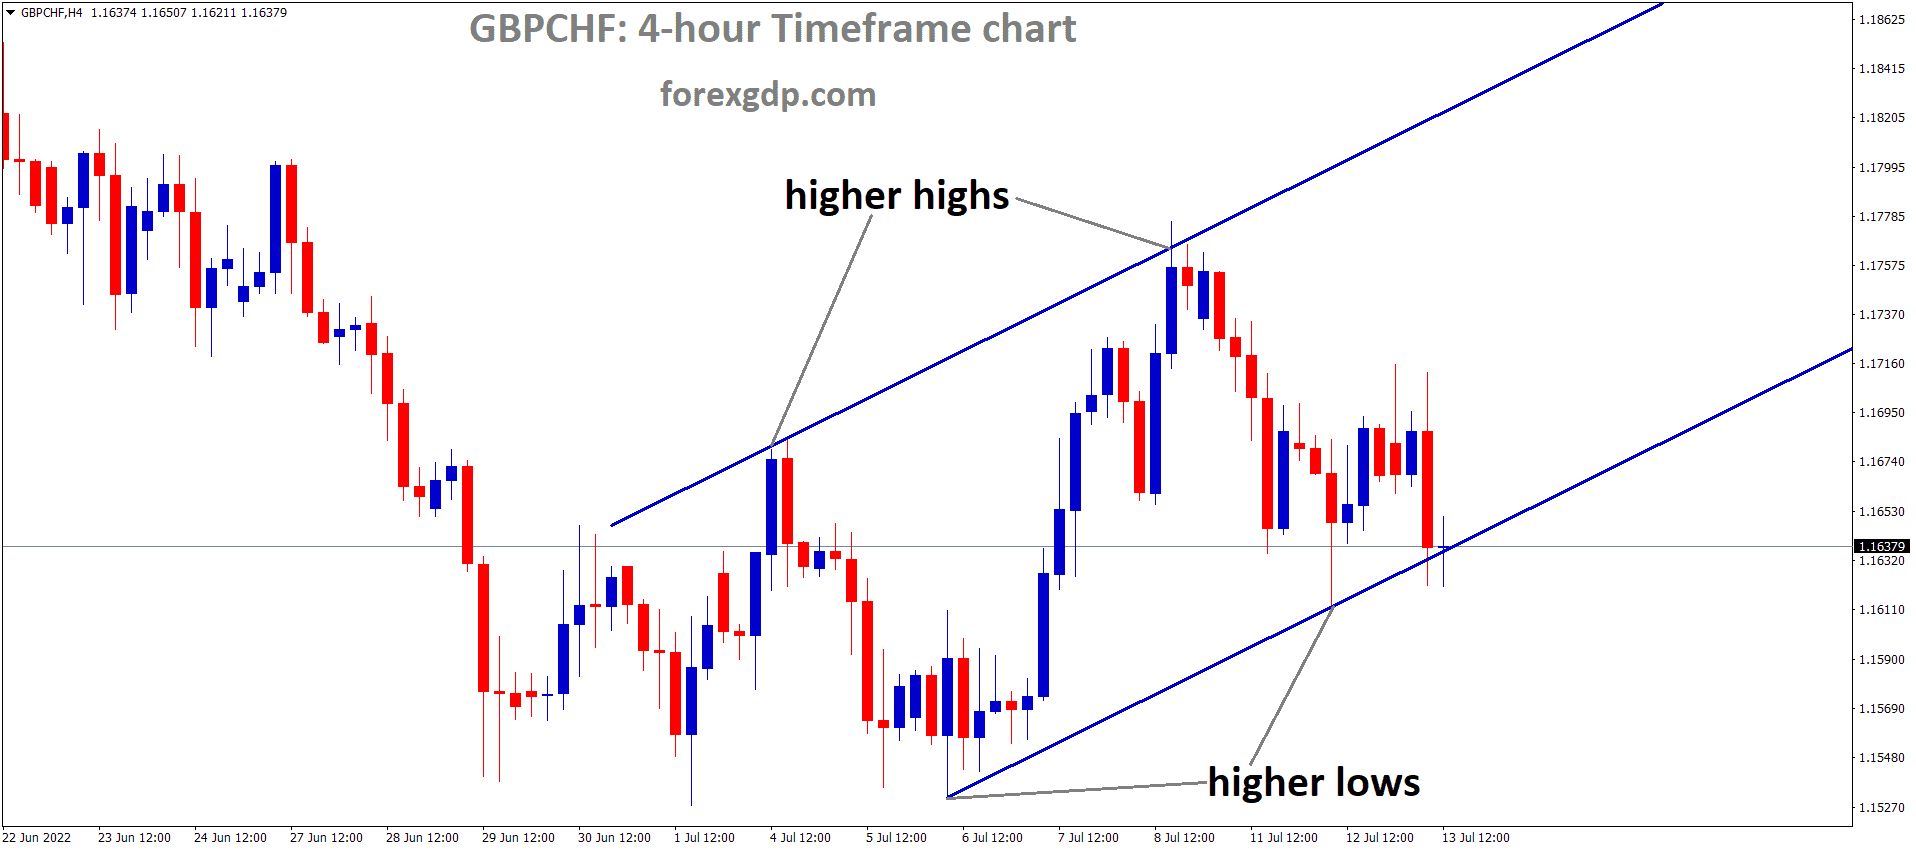 GBPCHF is moving in an Ascending channel and the Market has reached the higher low area of the channel 1